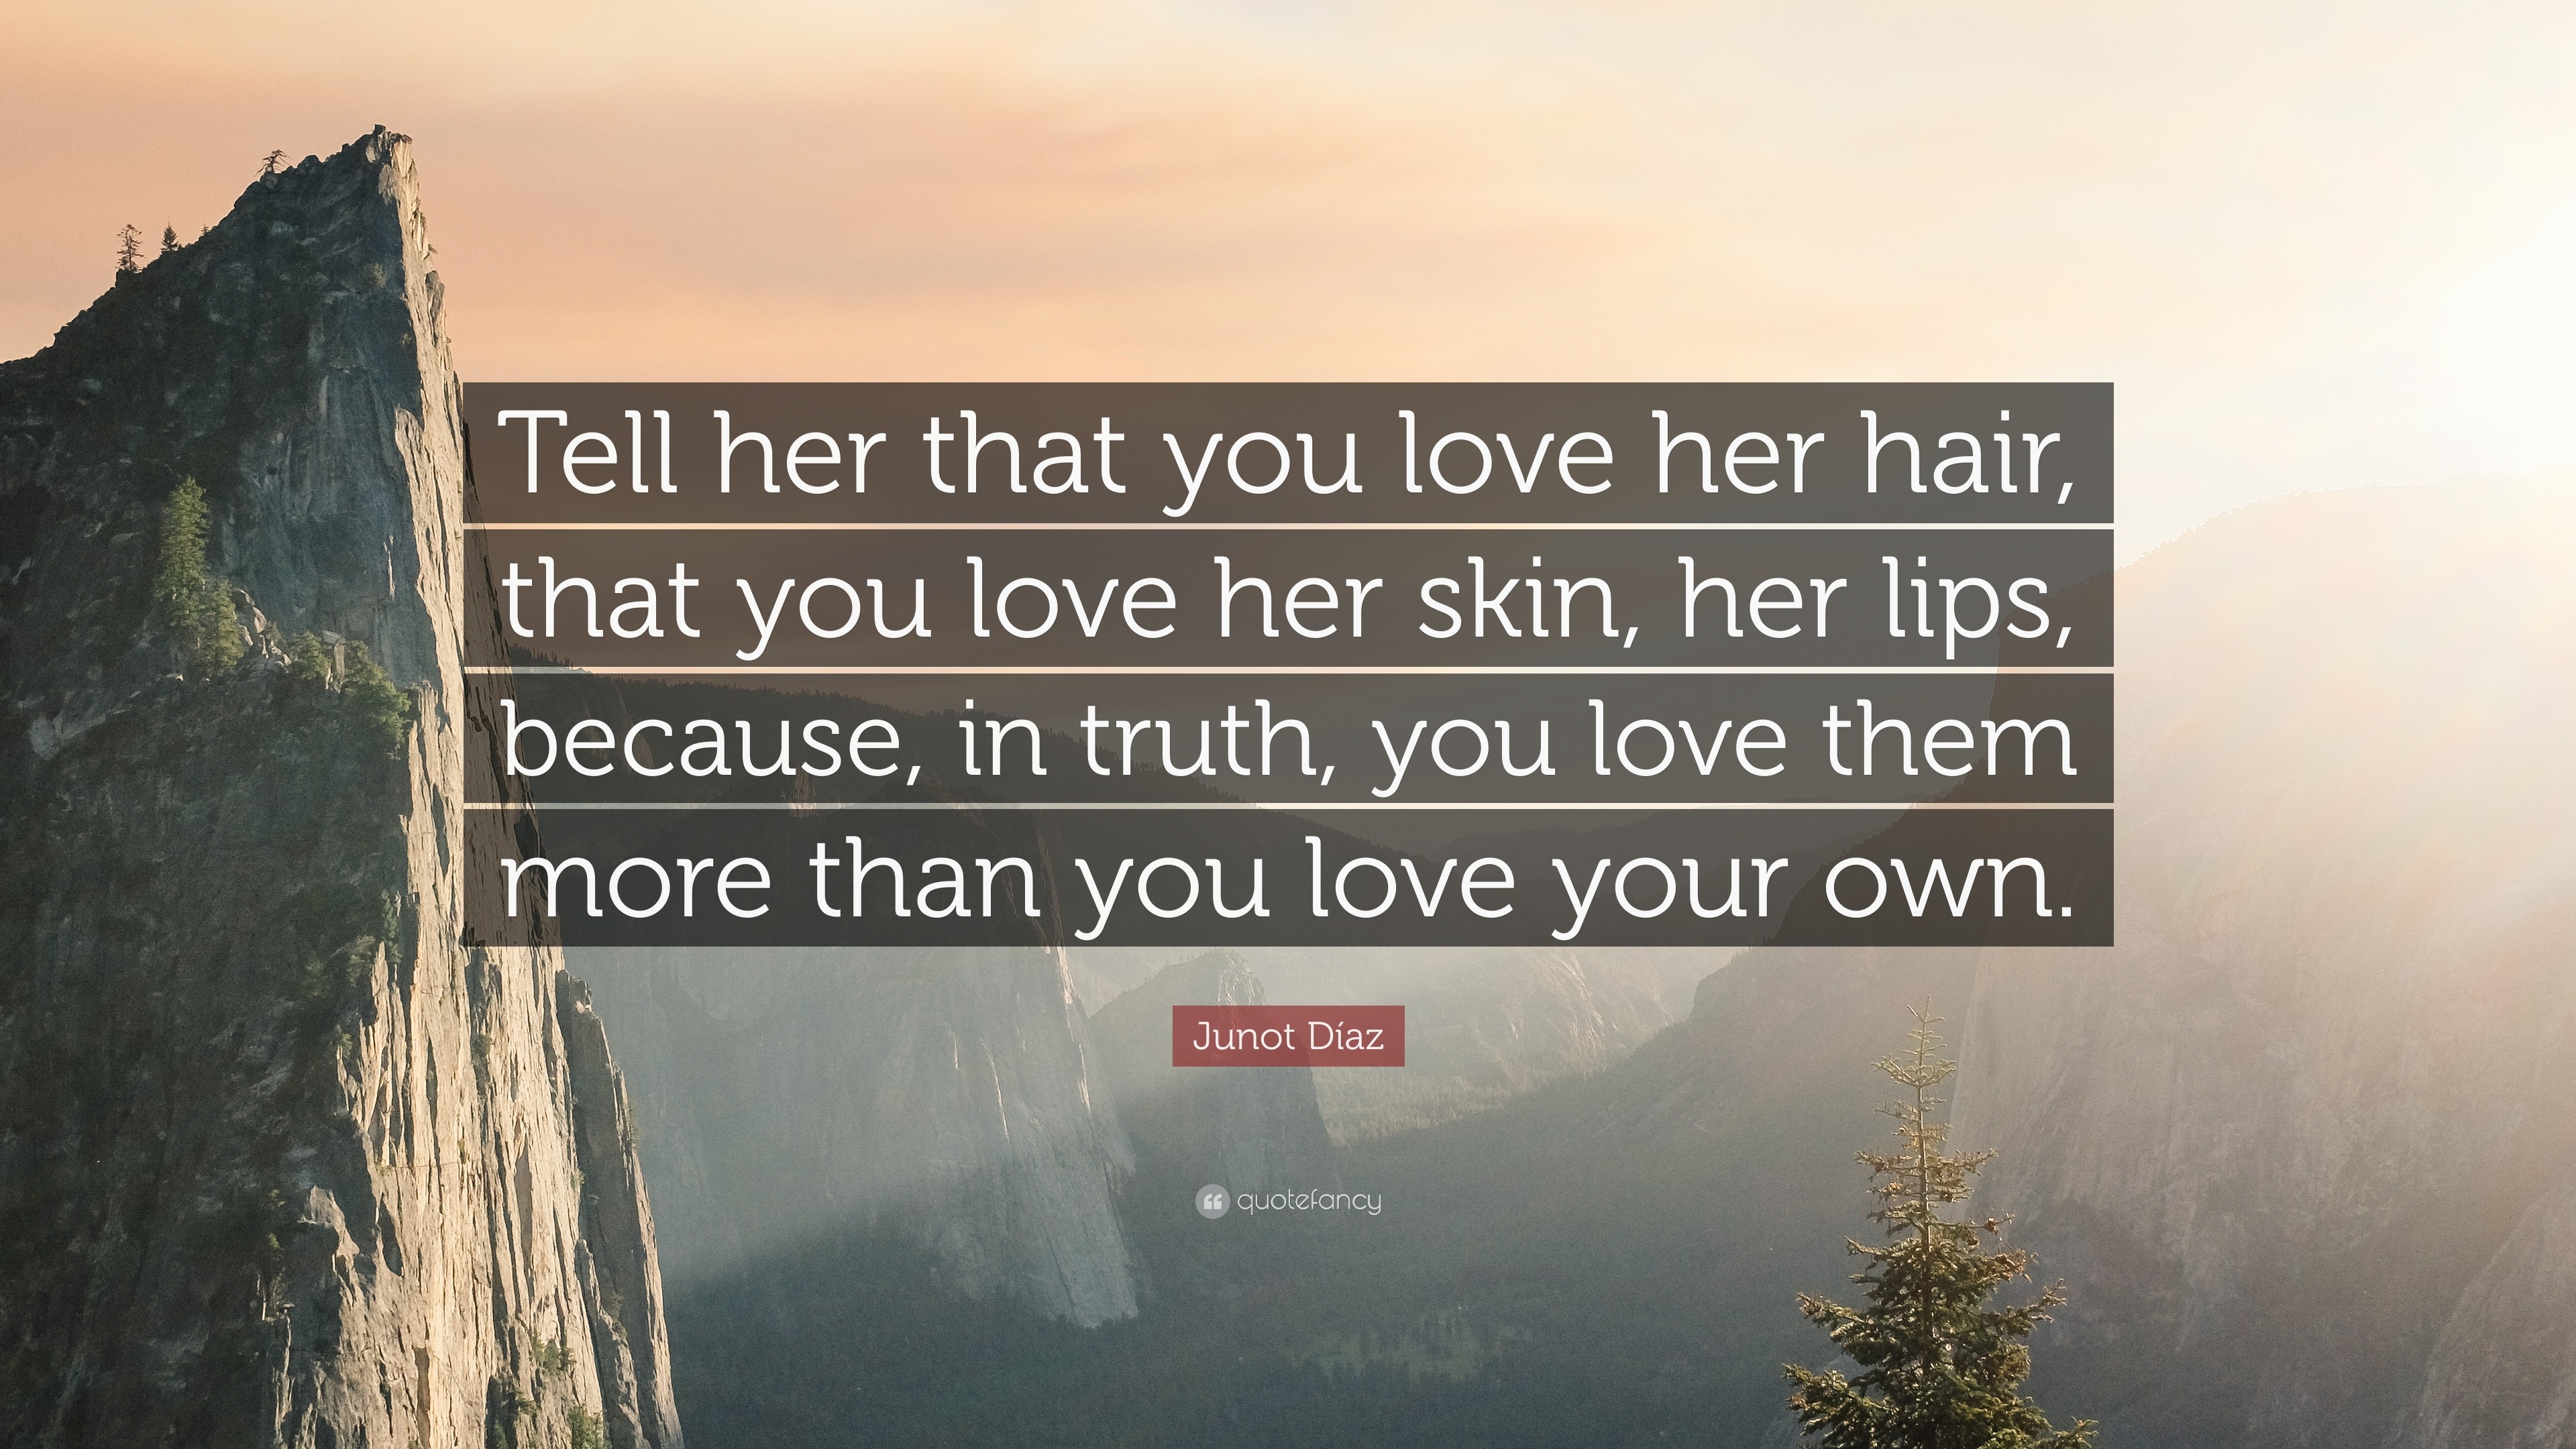 Junot Díaz Quote: “Tell her that you love her hair, that you love her skin,  her lips, because, in truth, you love them more than you love y...”